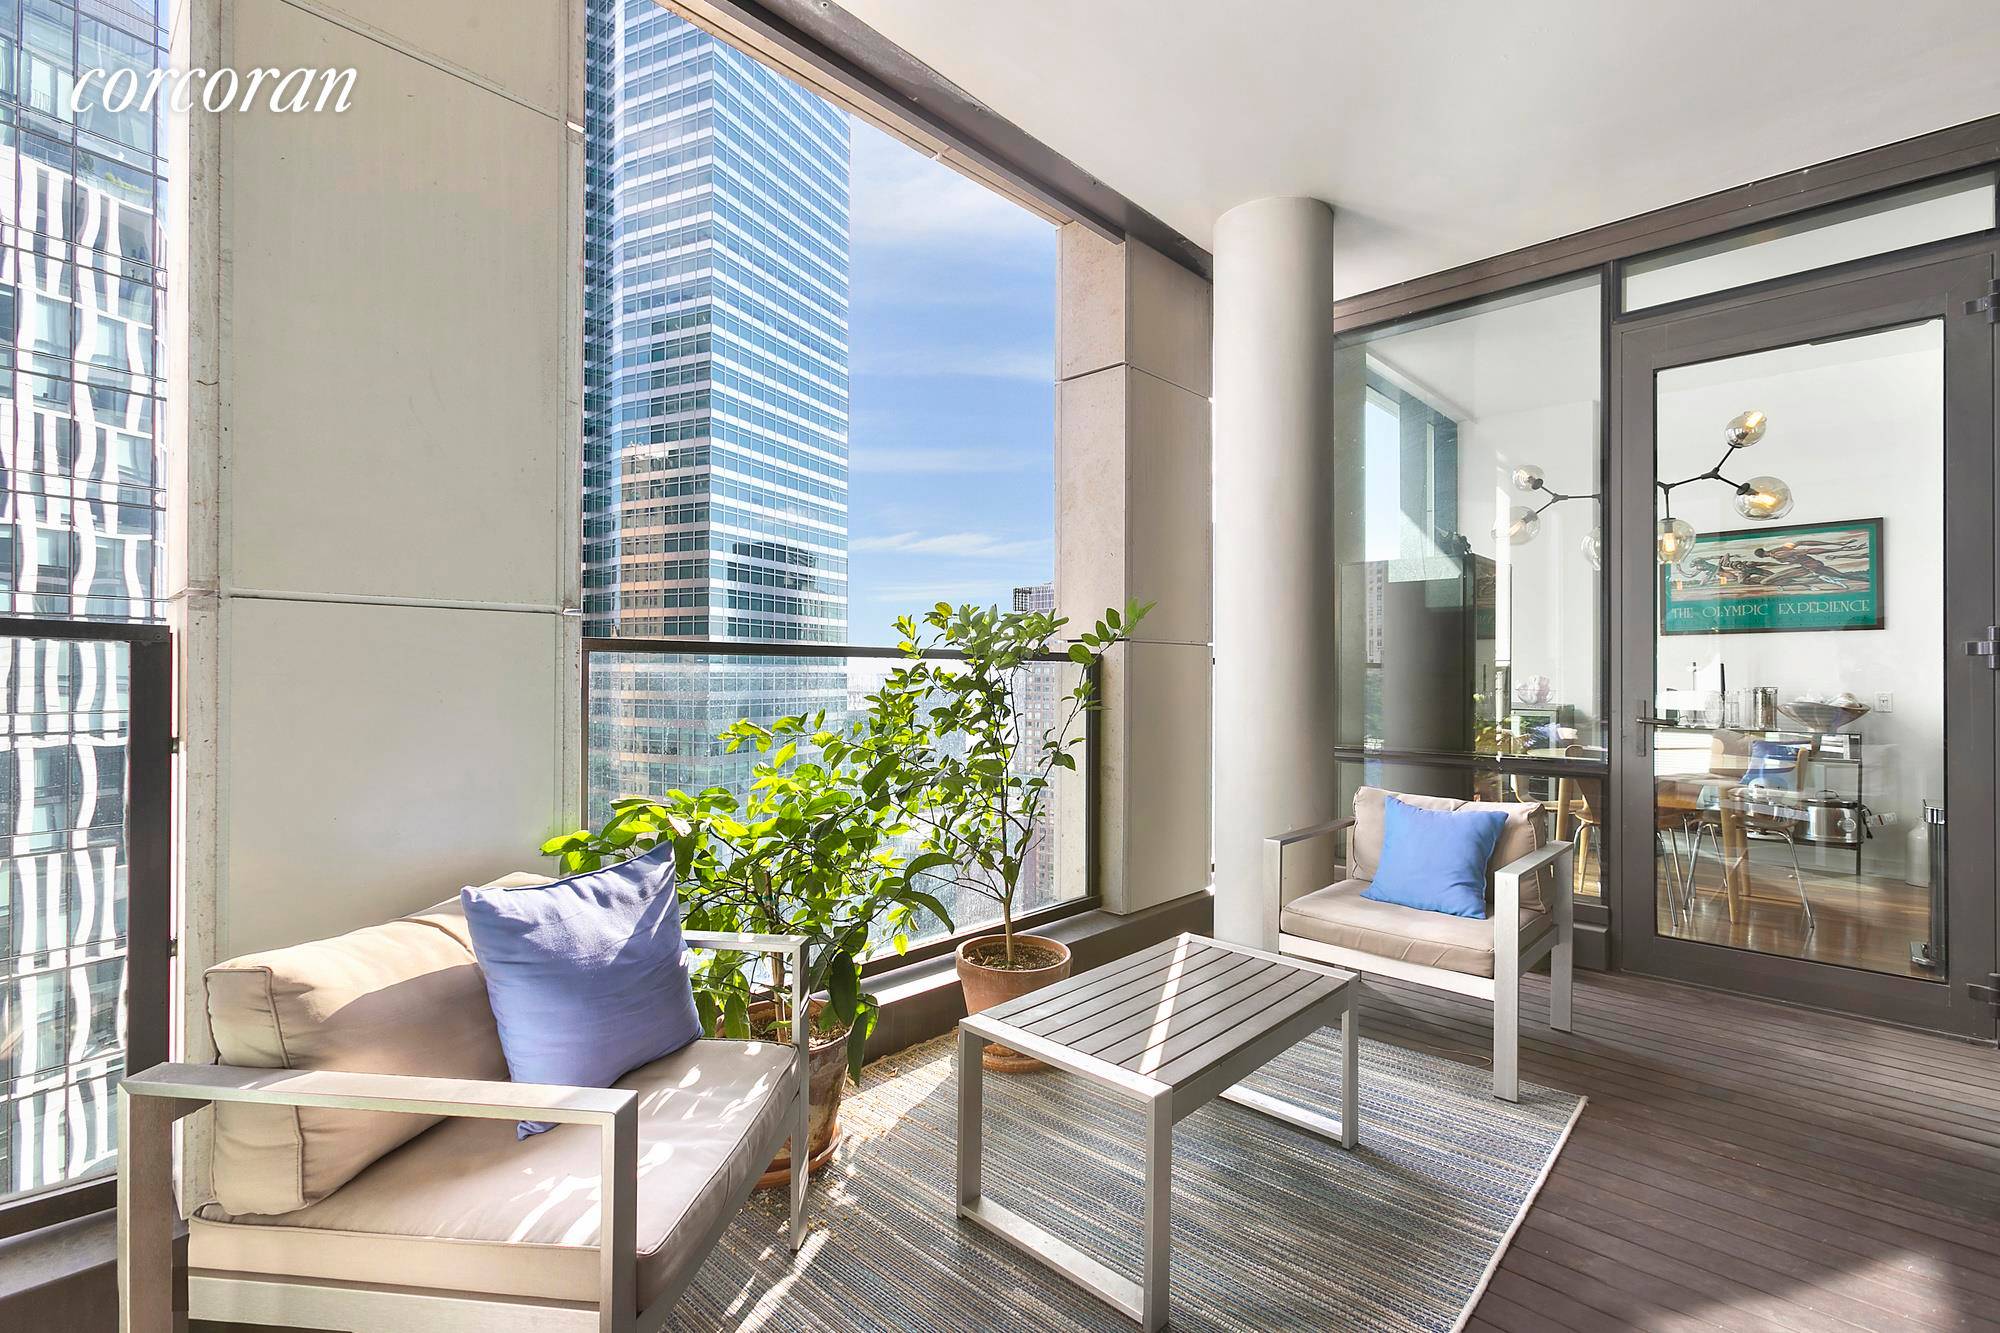 Bask in glorious views and refined interiors in this expansive two bedroom, two and a half bathroom showplace with private outdoor space in Tribeca's most sought after luxury condominium.